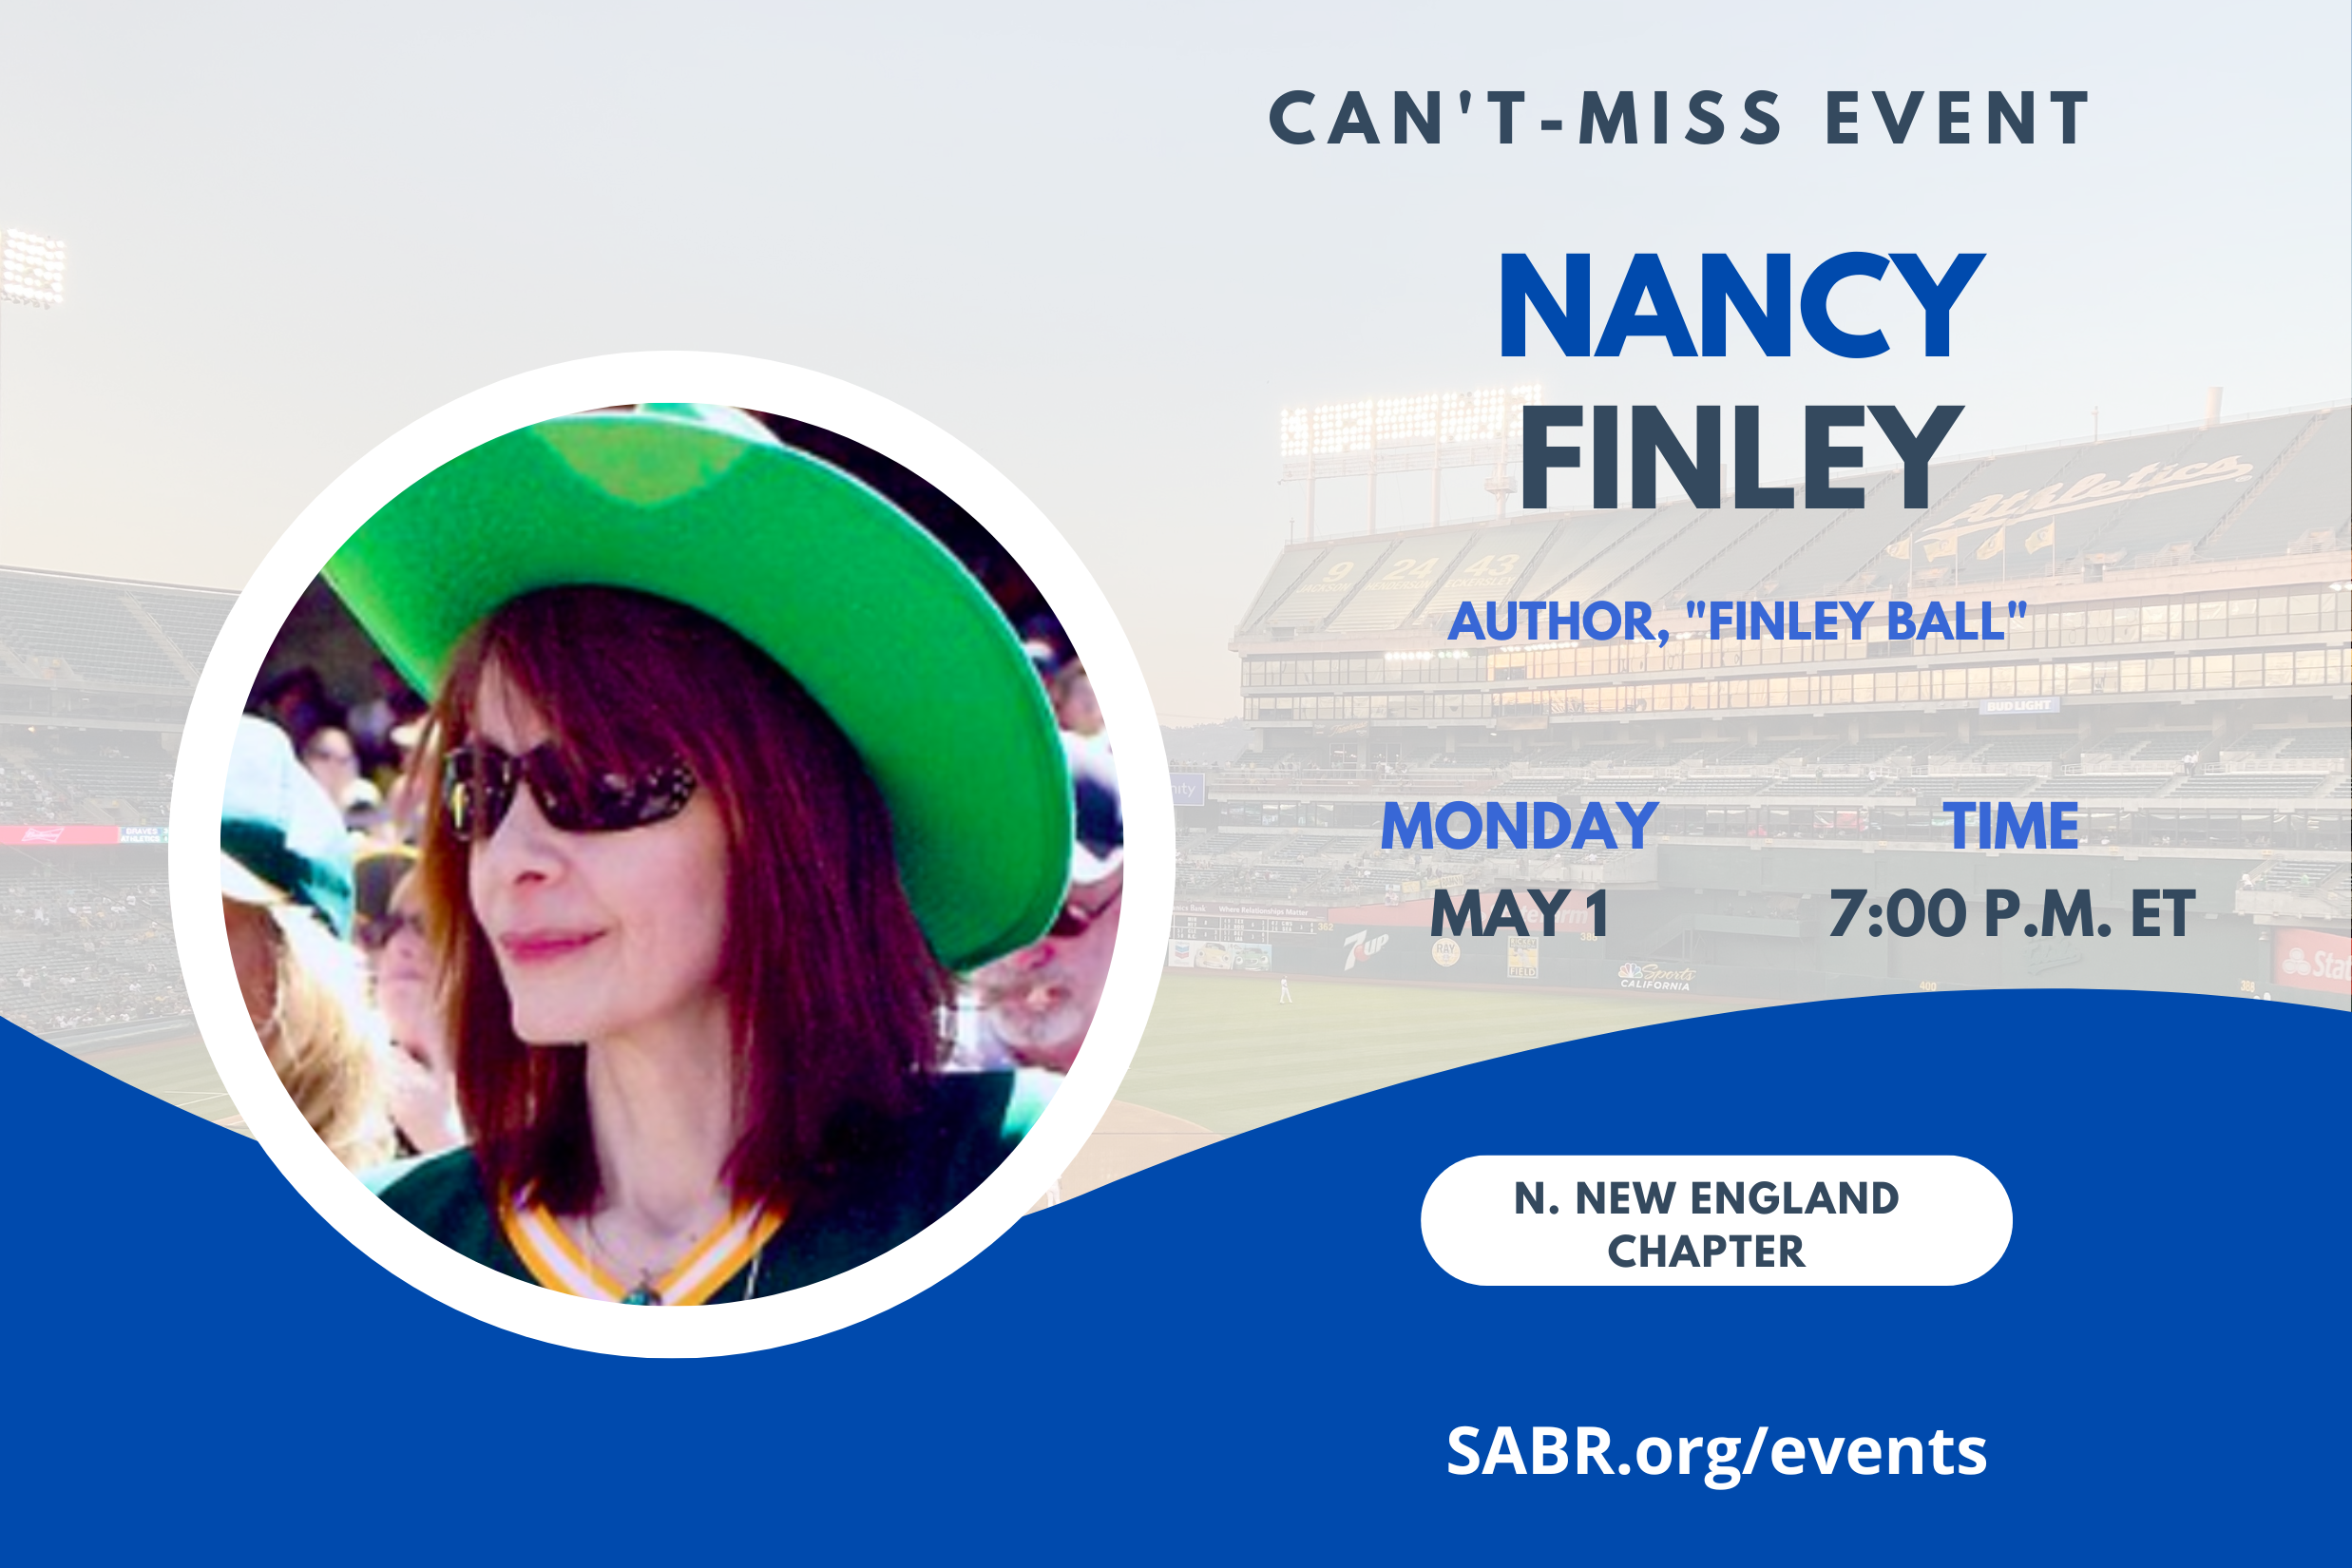 The Northern New England Chapter, in partnership with the Gardner-Waterman Chapter of VT presents Nancy Finley in a special Zoom event at 7:00 p.m. ET on Monday, May 1, 2023. All baseball fans are welcome to attend.

Nancy’s book, “Finley Ball" is the story of a losing baseball team that became a 1970s dynasty, thanks to the unorthodox strategies of two very colorful men.